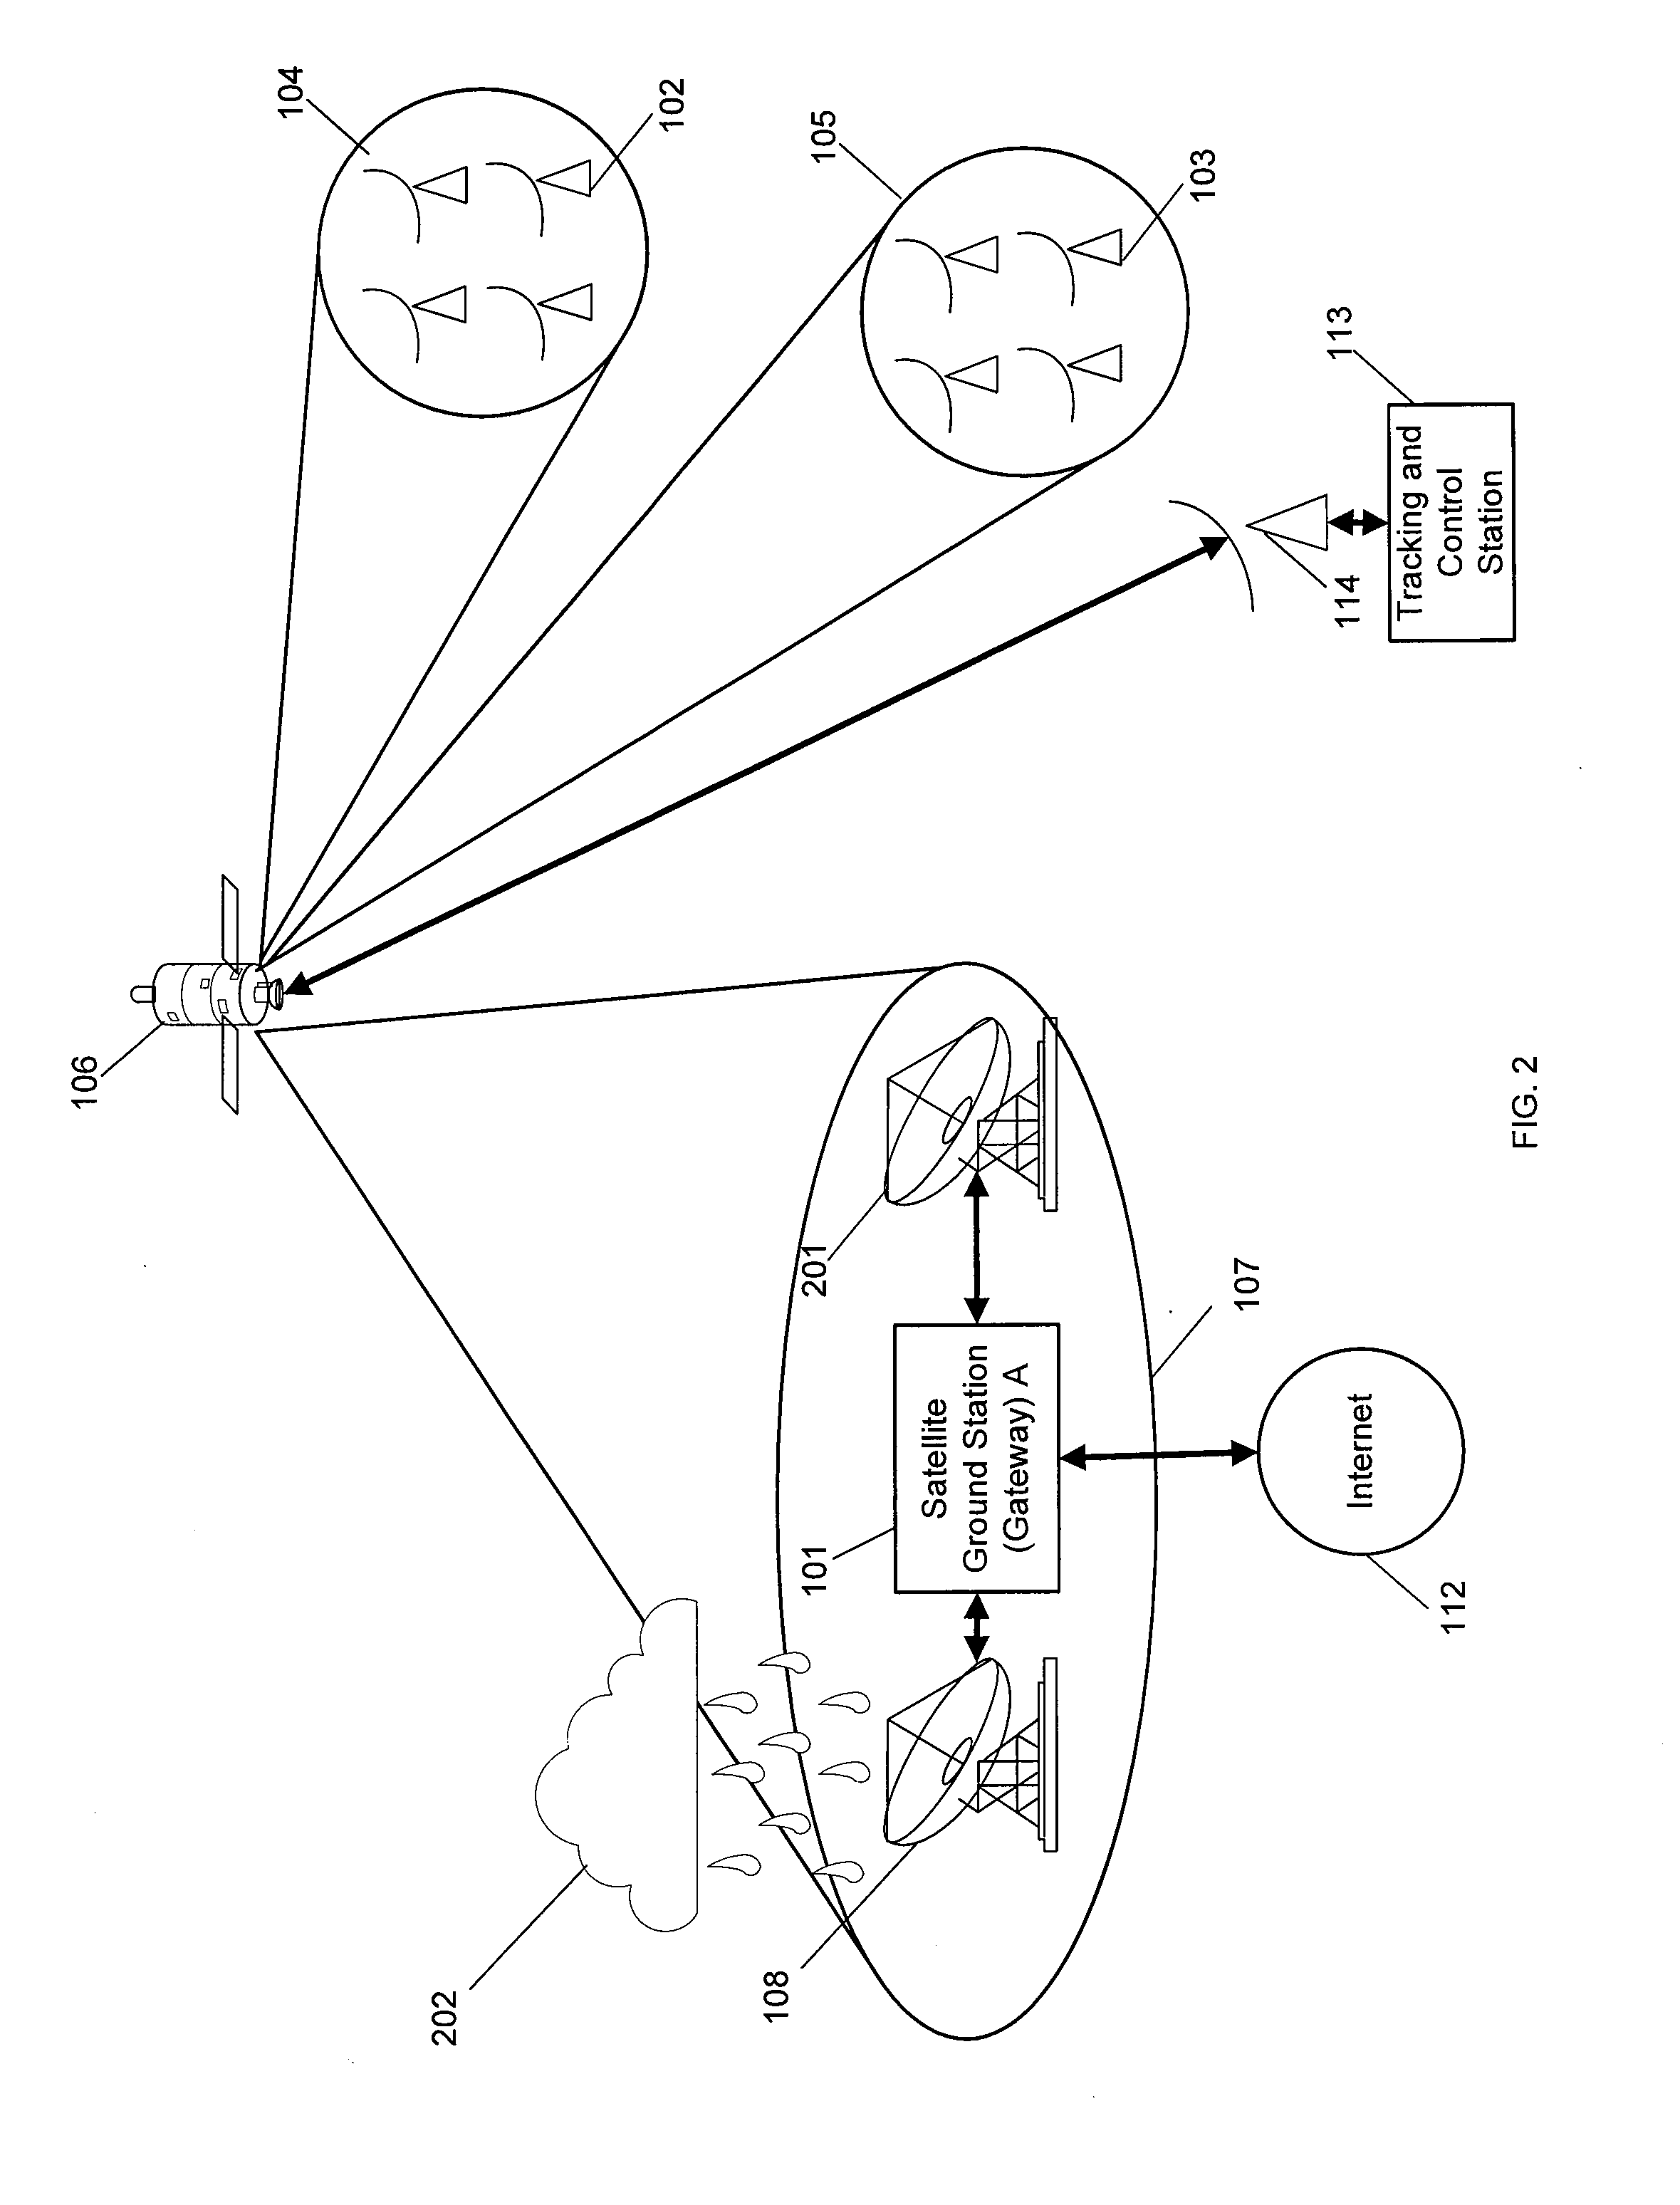 System and method for gateway RF diversity using a configurable spot beam satellite